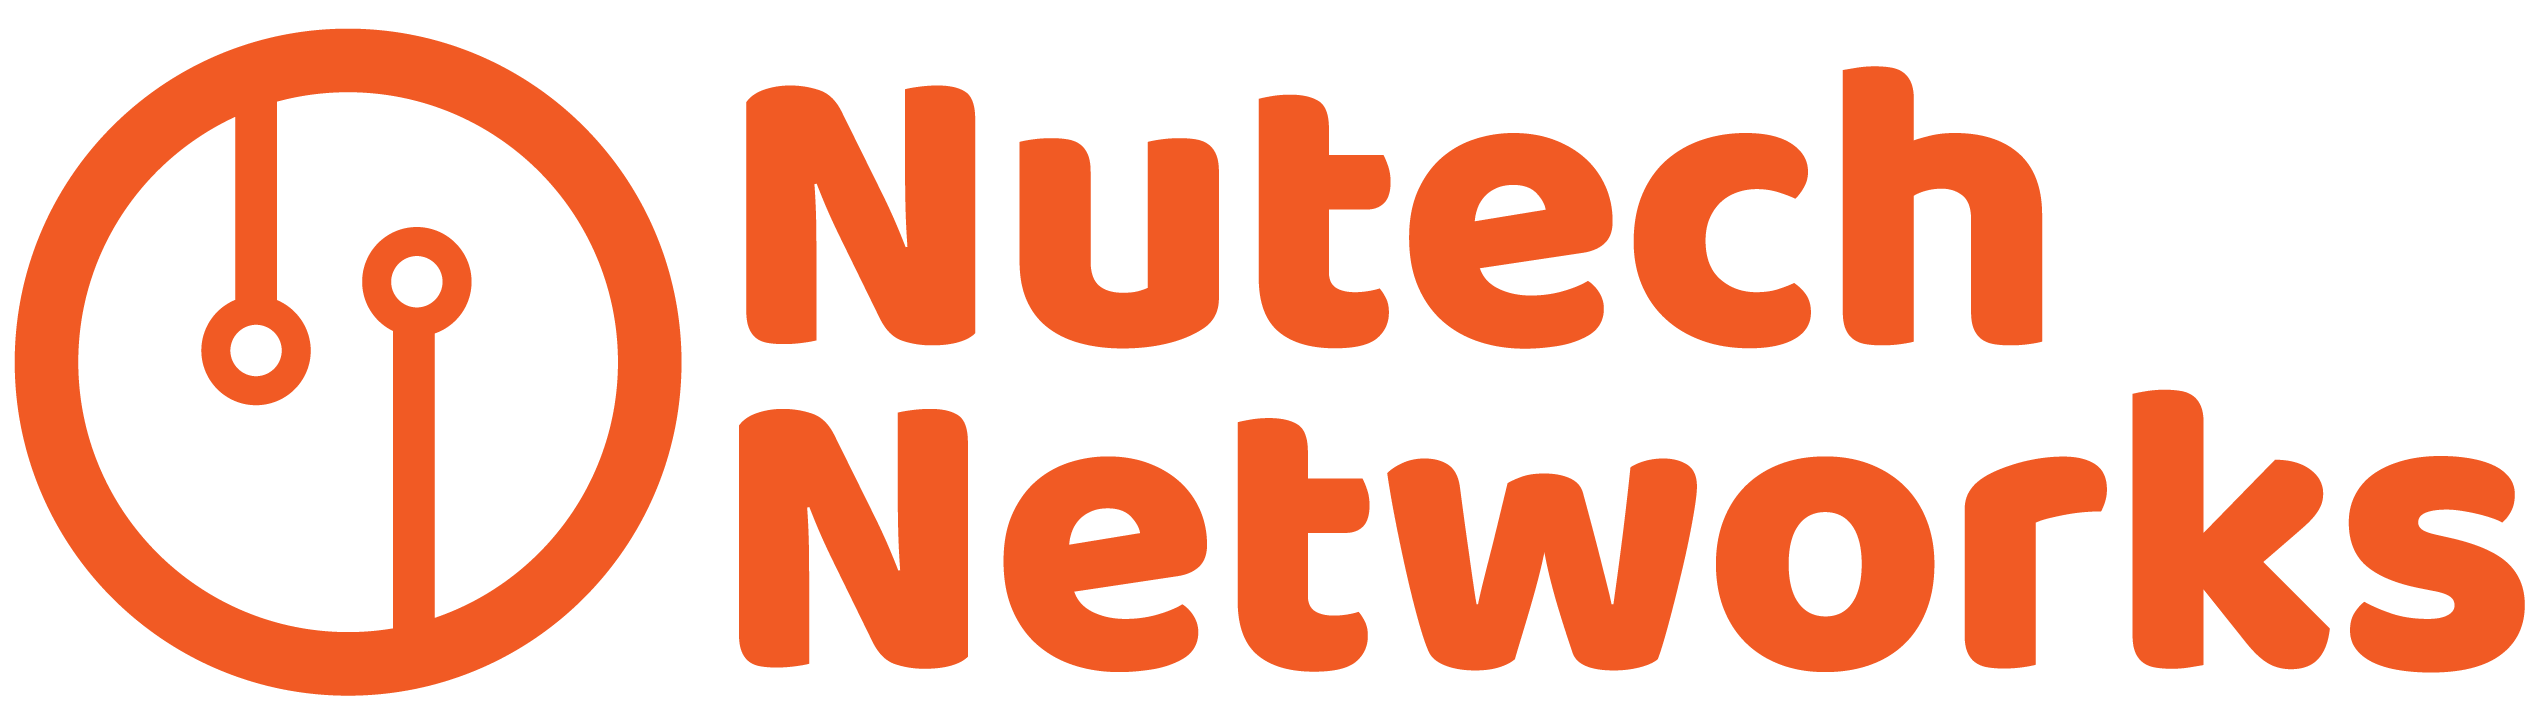 Nutech Networks logo - IT support for Melbourne businesses and charities